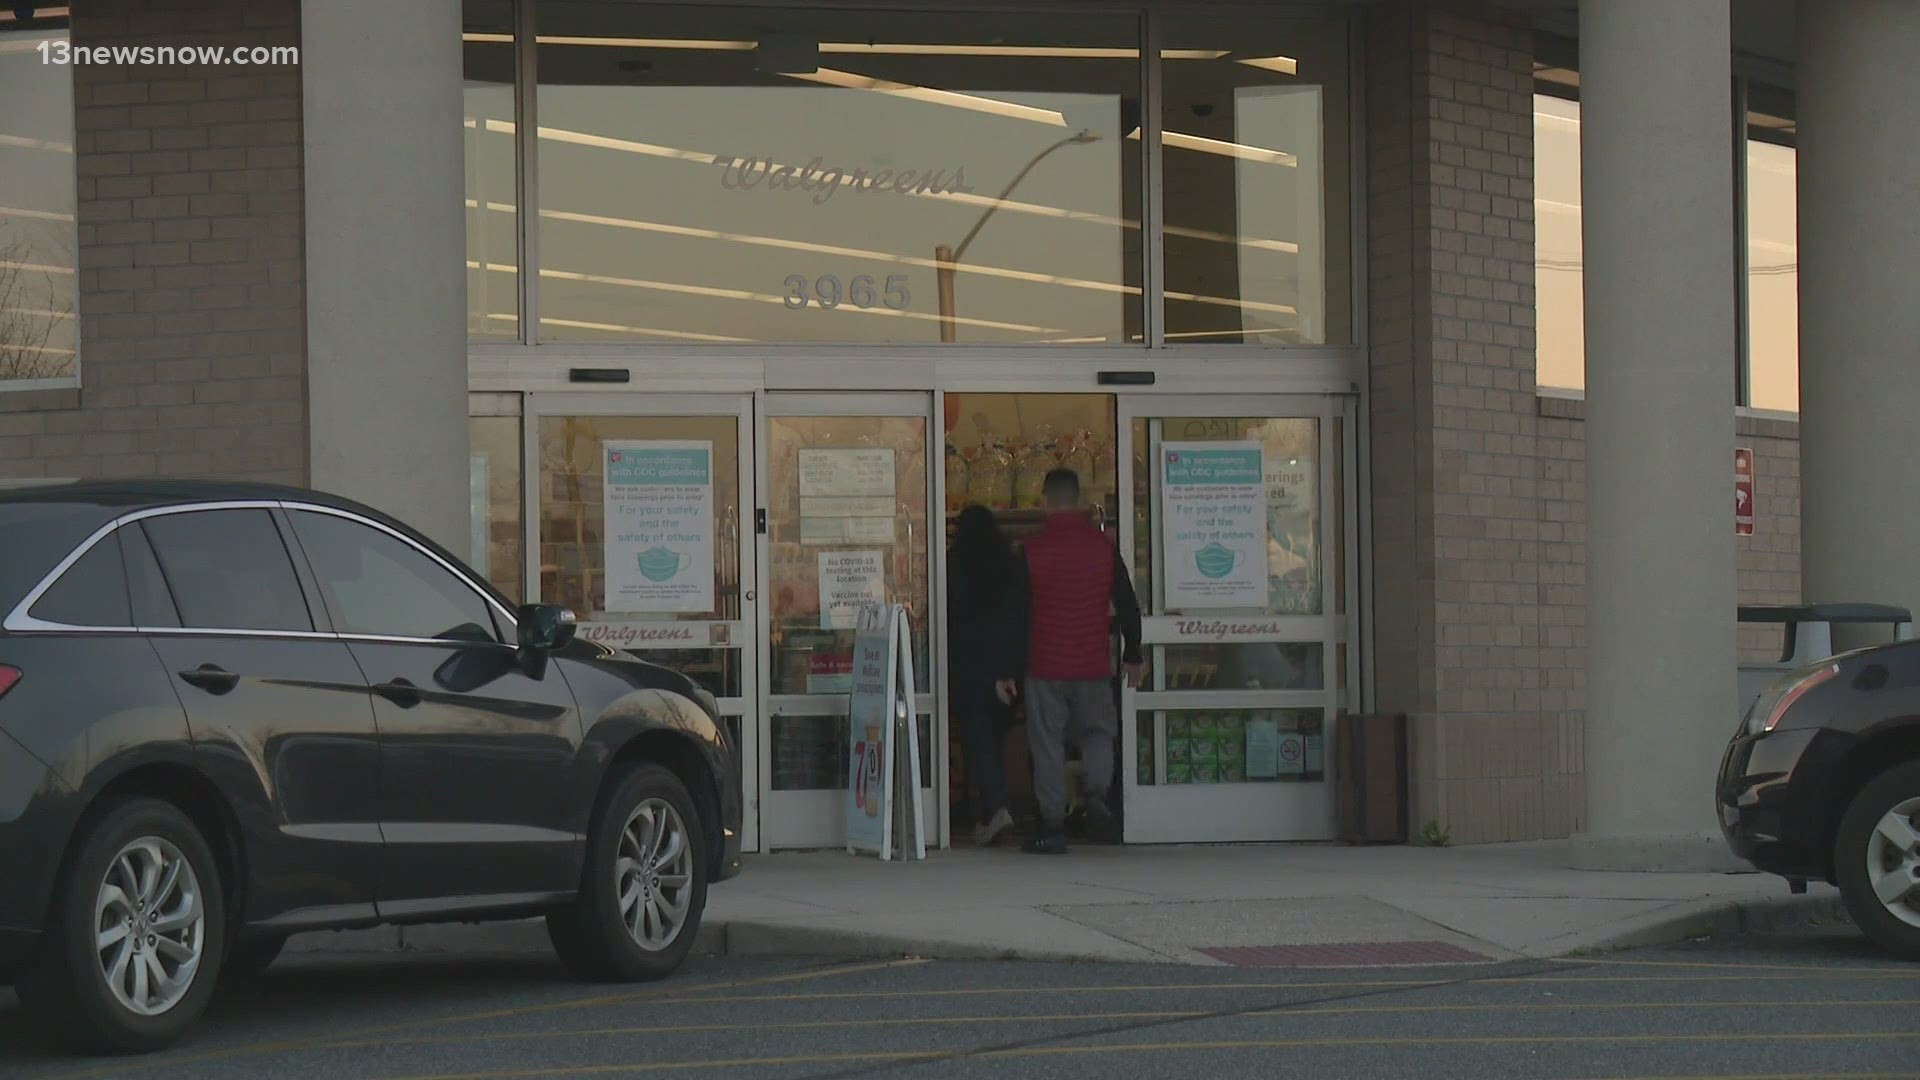 Walgreens is still working on determining the number of doses it'll receive.